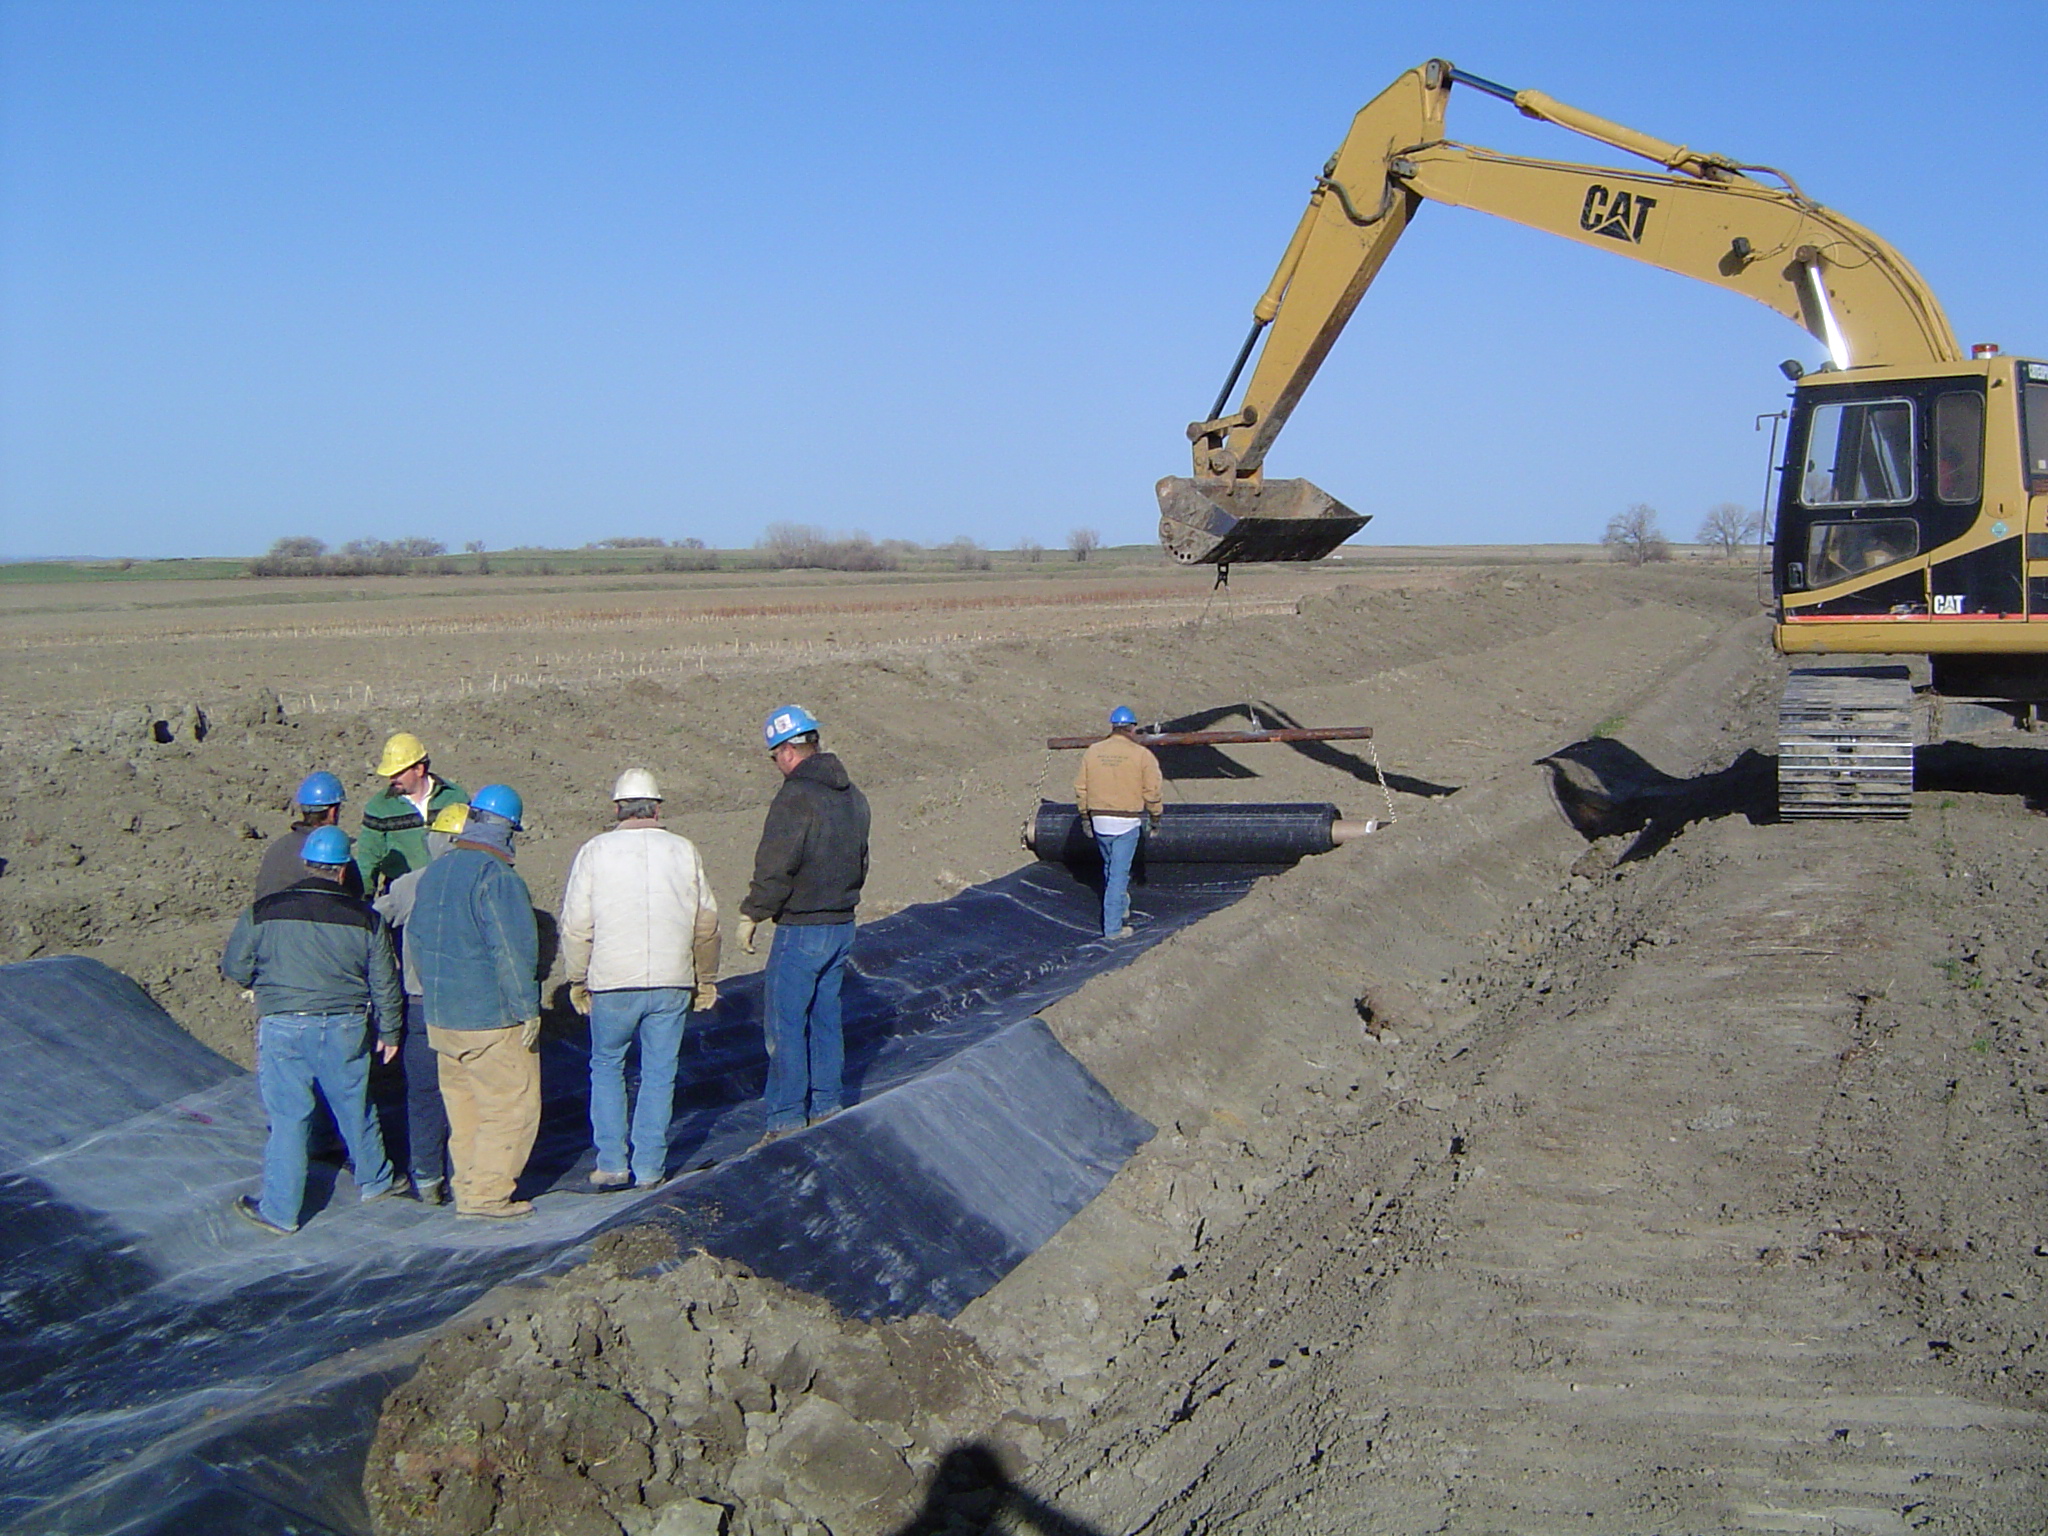 An excavator is helping people roll out a lining in a small canal in a field.